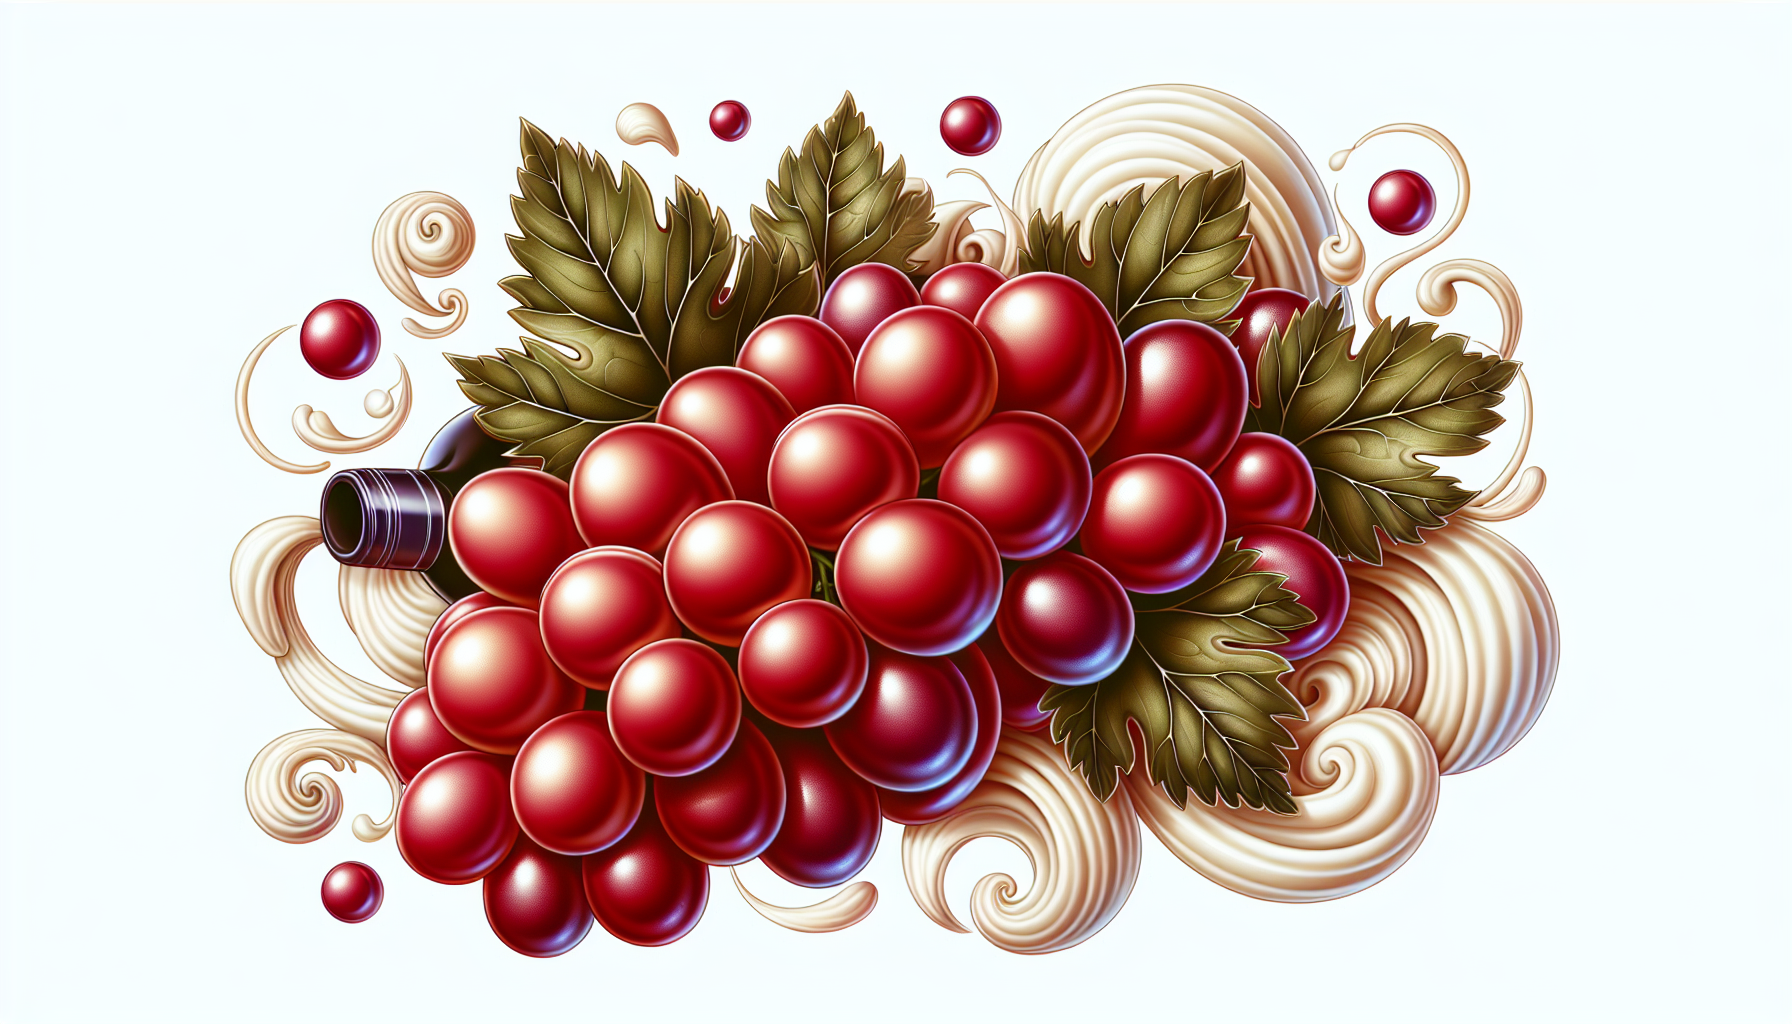 Illustration of red wine grapes with creamy textures, symbolizing red wines with buttery notes.